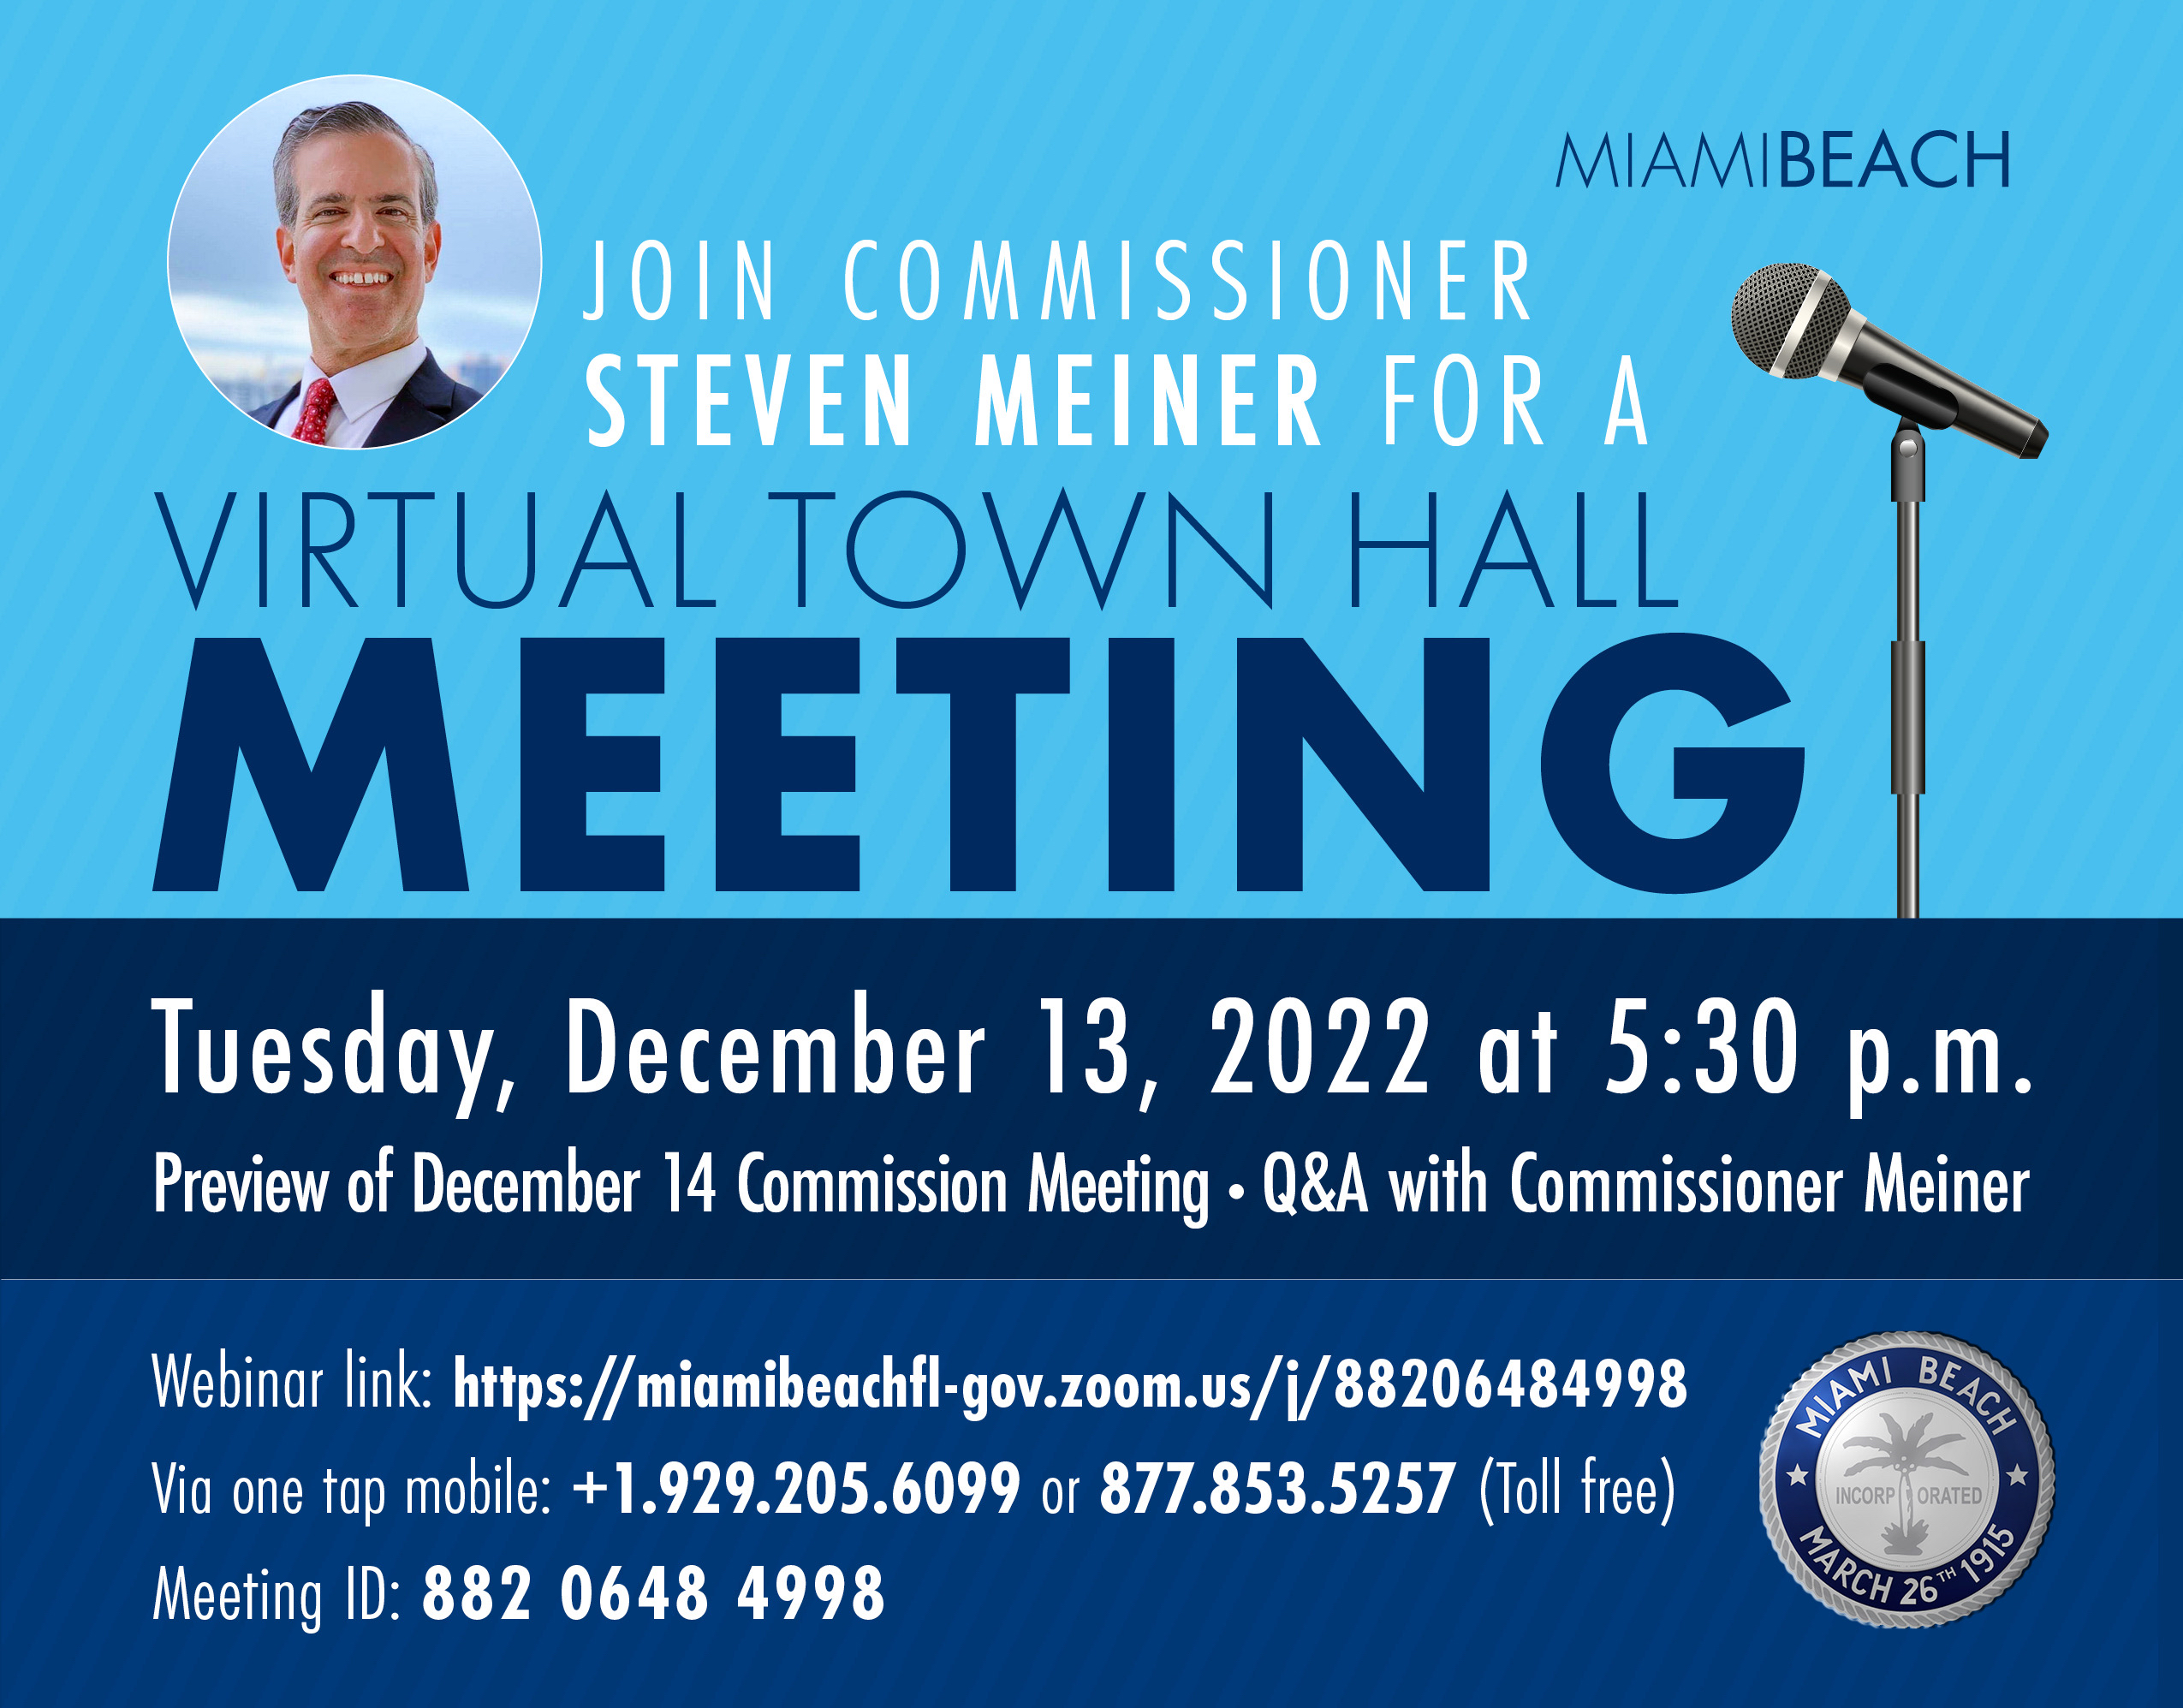 Virtual Town Hall Meeting with Commissioner Meiner